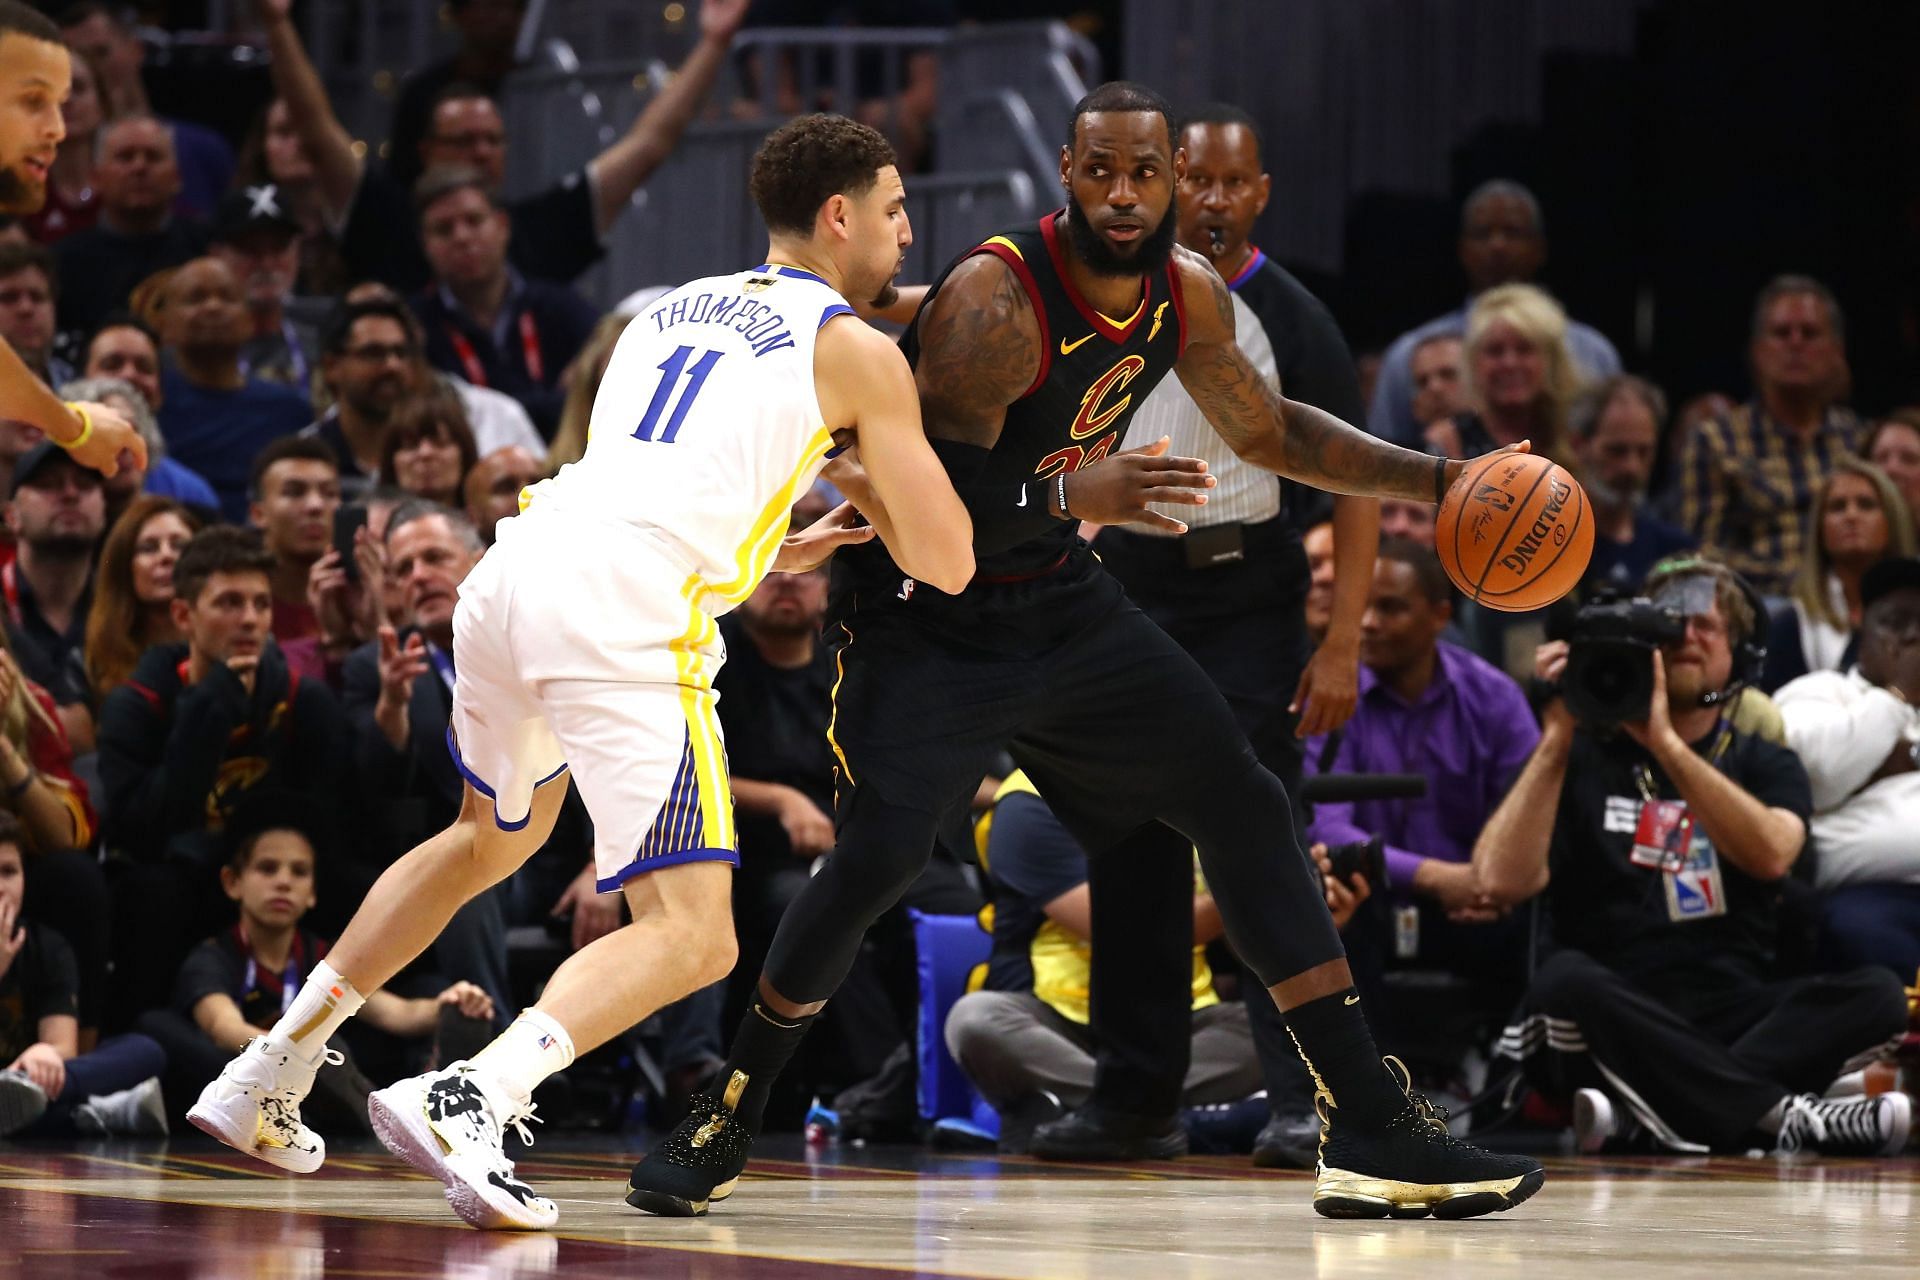 LeBron James #23 of the Cleveland Cavaliers handles the ball against Klay Thompson #11 of the Golden State Warriors